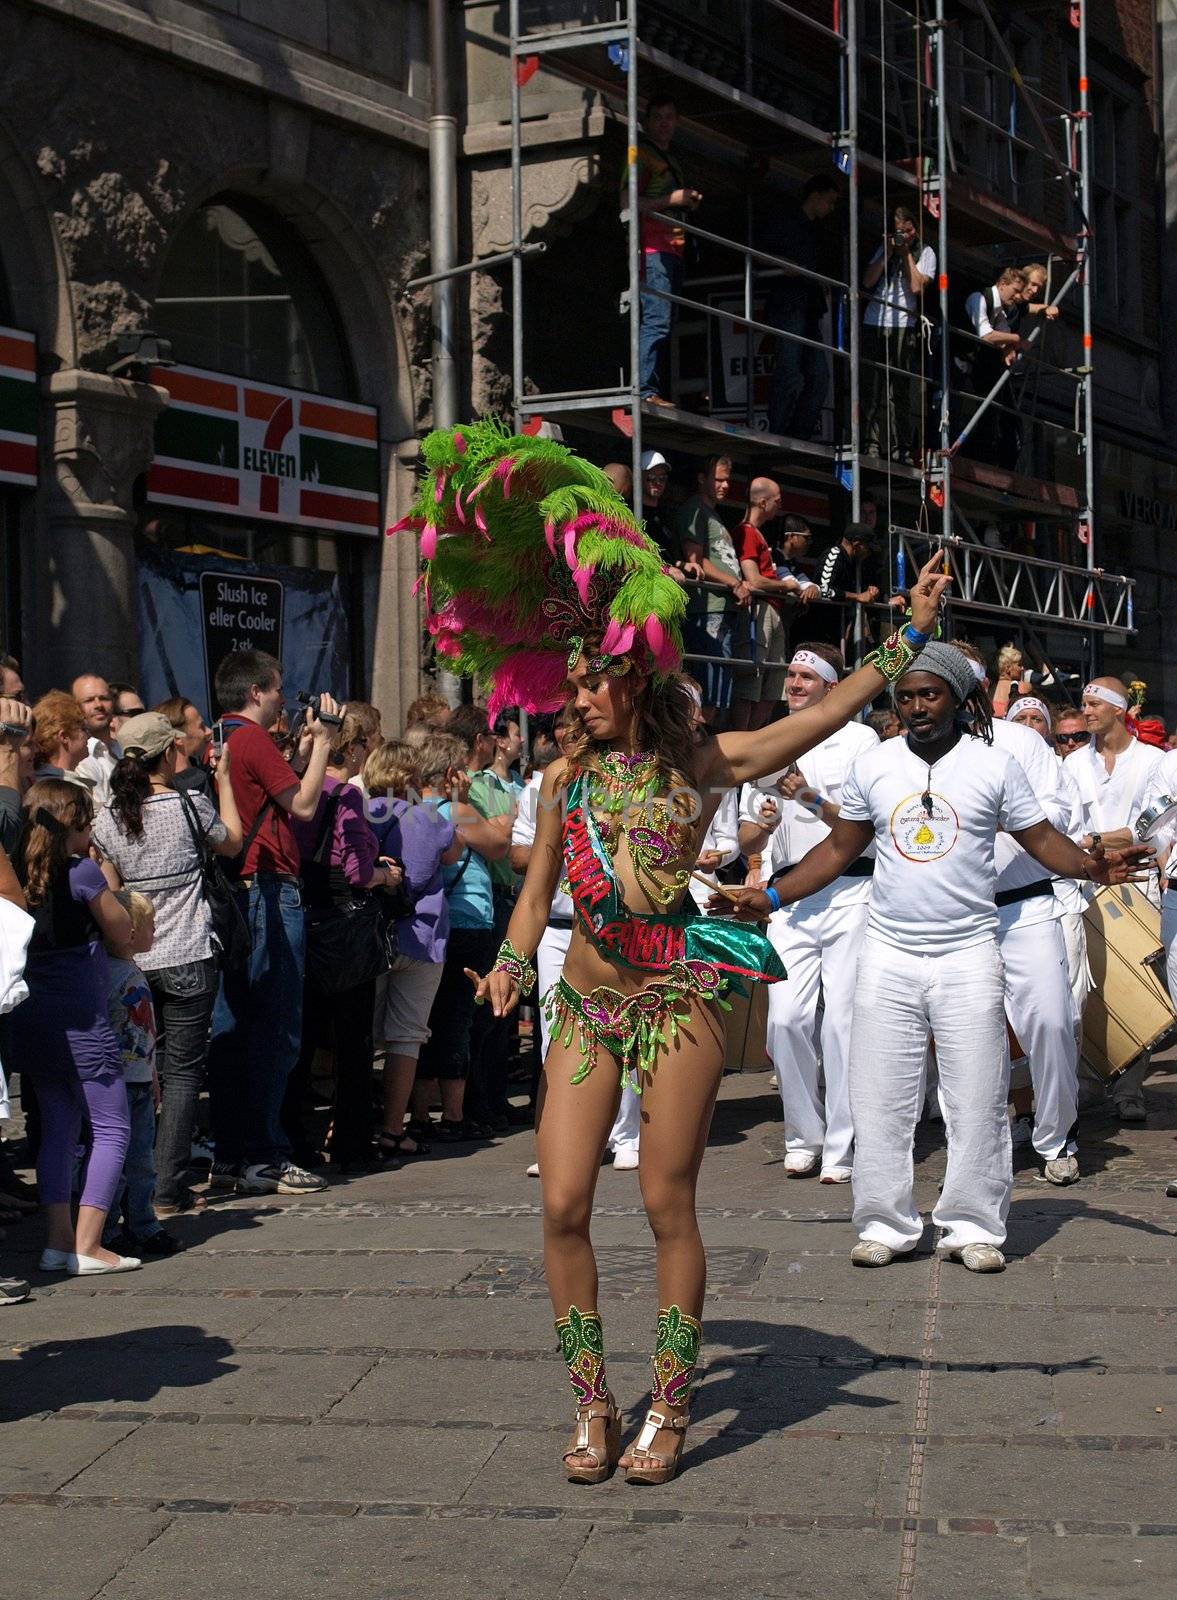 Three-day-event of fun, music, workshops and performance from 29th-31st May 2009. http://www.karneval.dk/